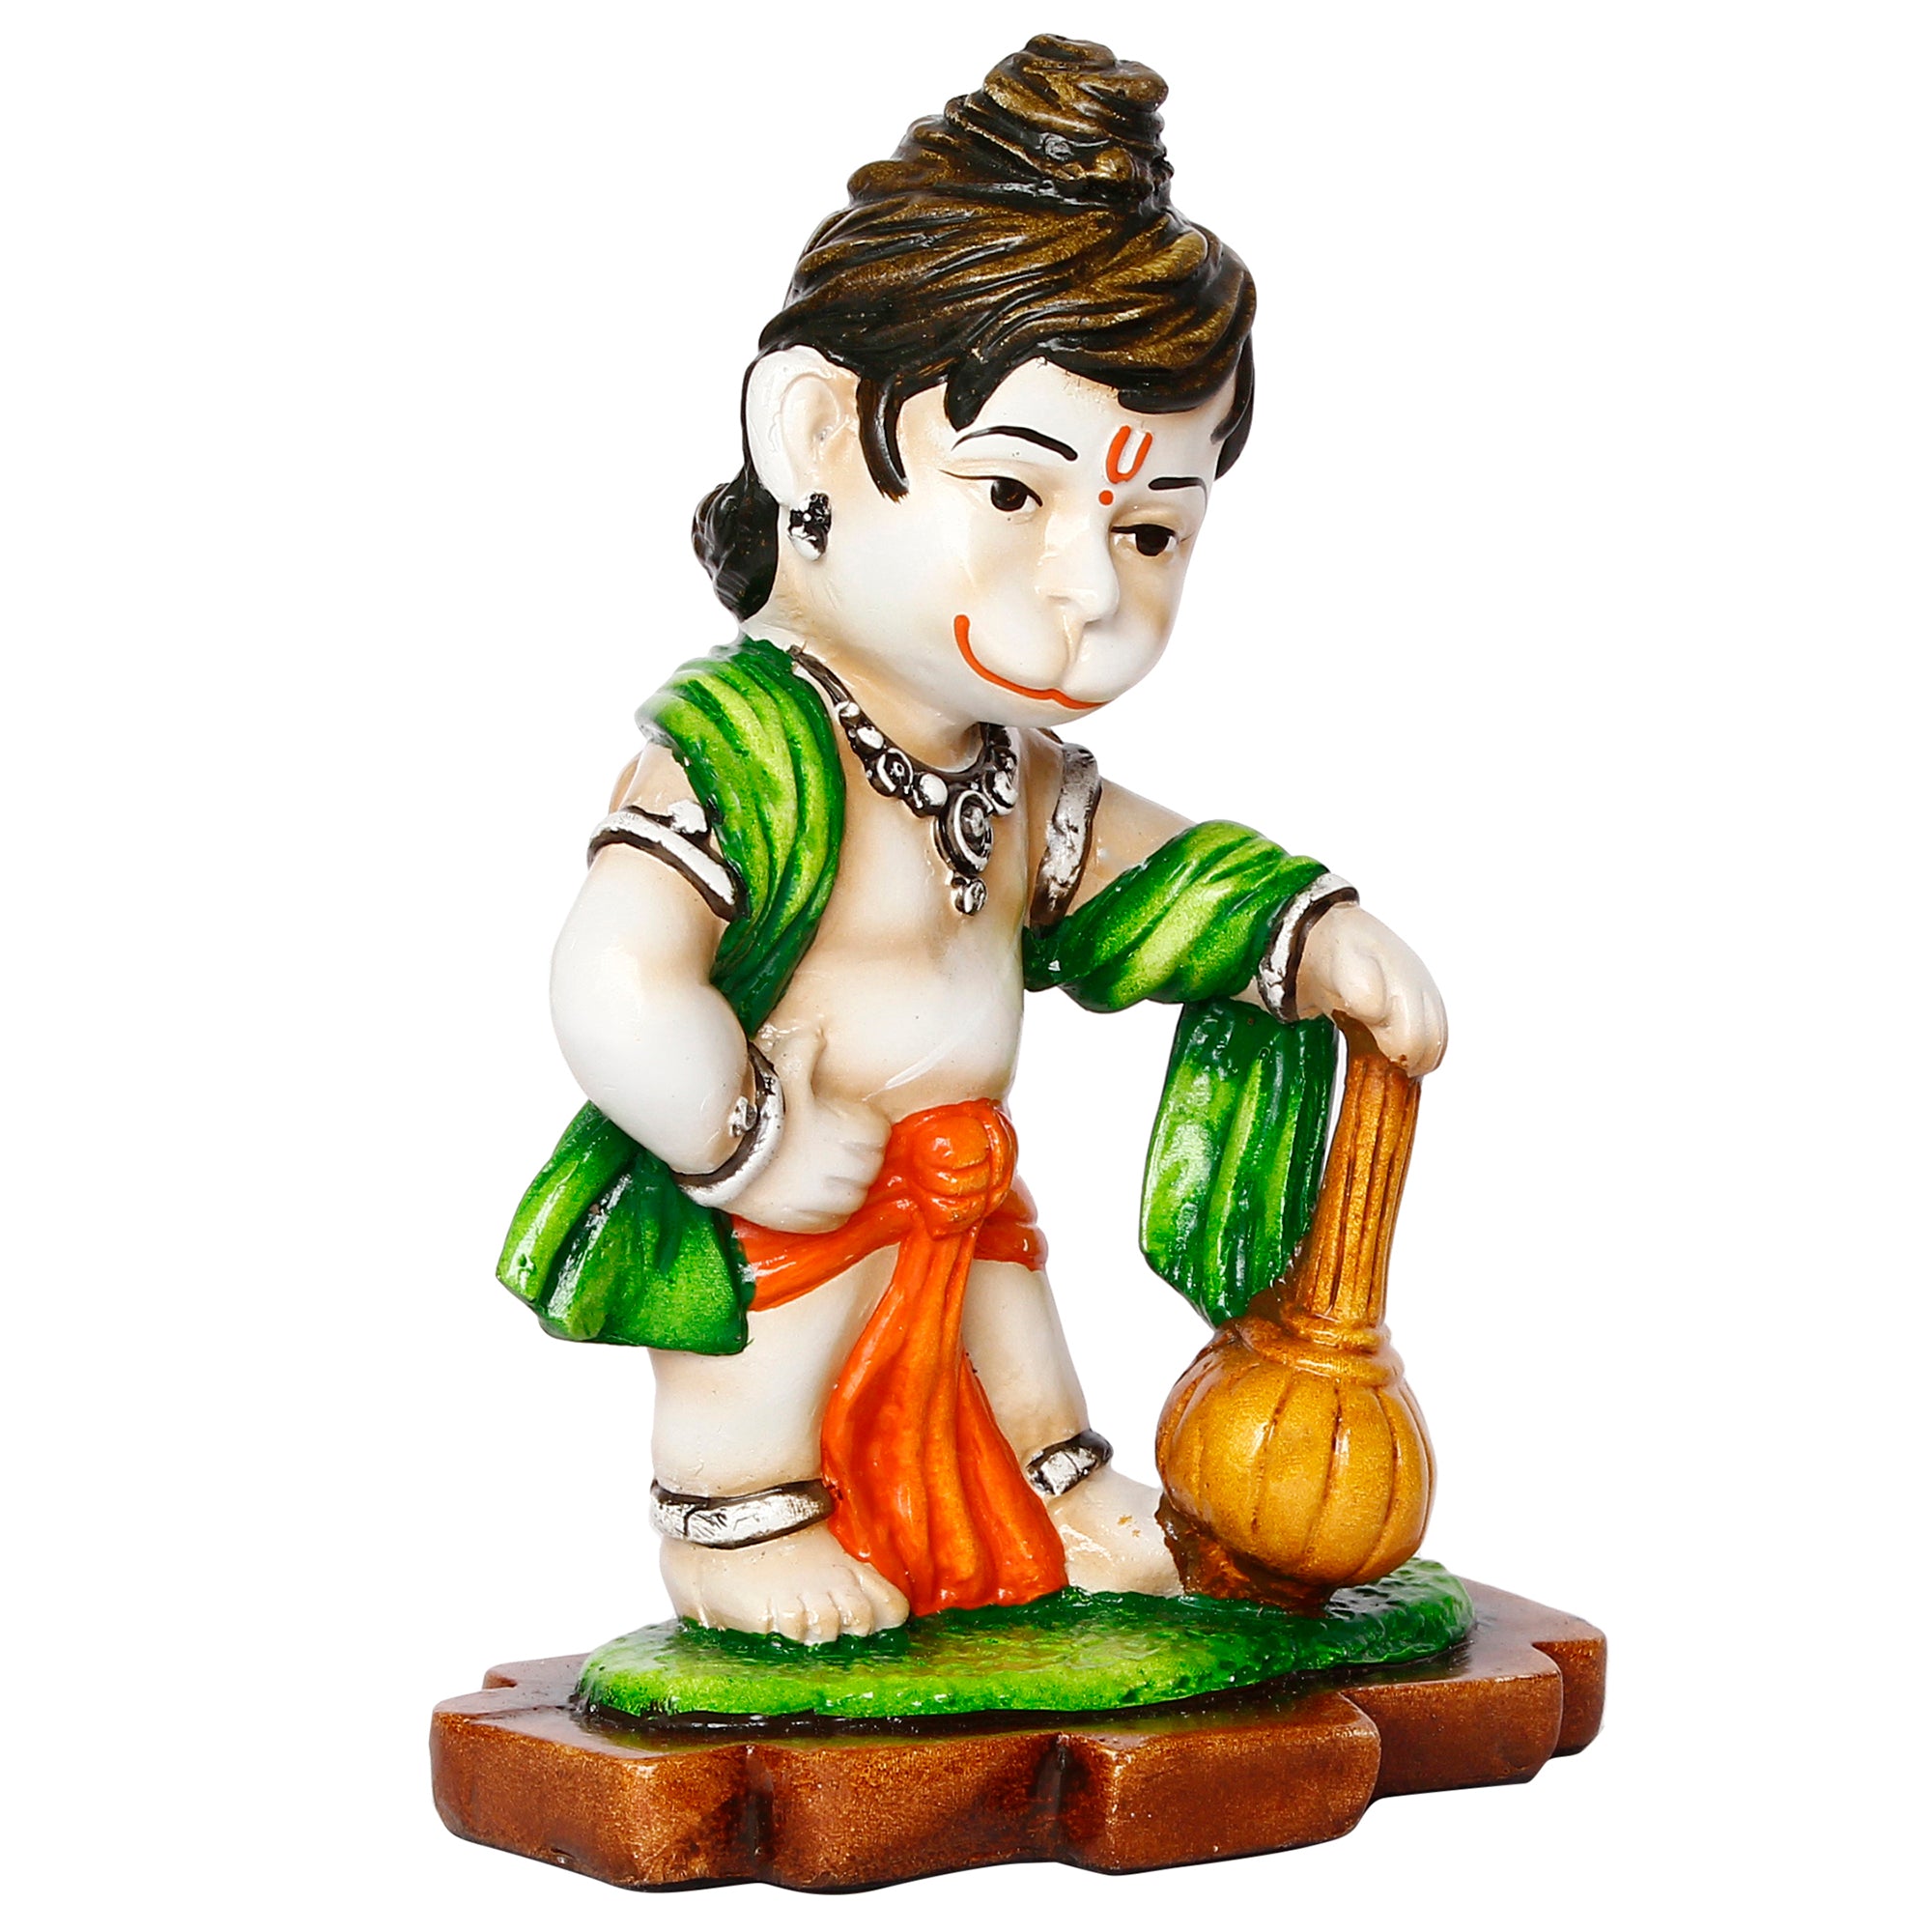 Colorful Standing Lord Hanuman Statue With Gada/Mace Handcrafted Polyresin Religious Idol 4